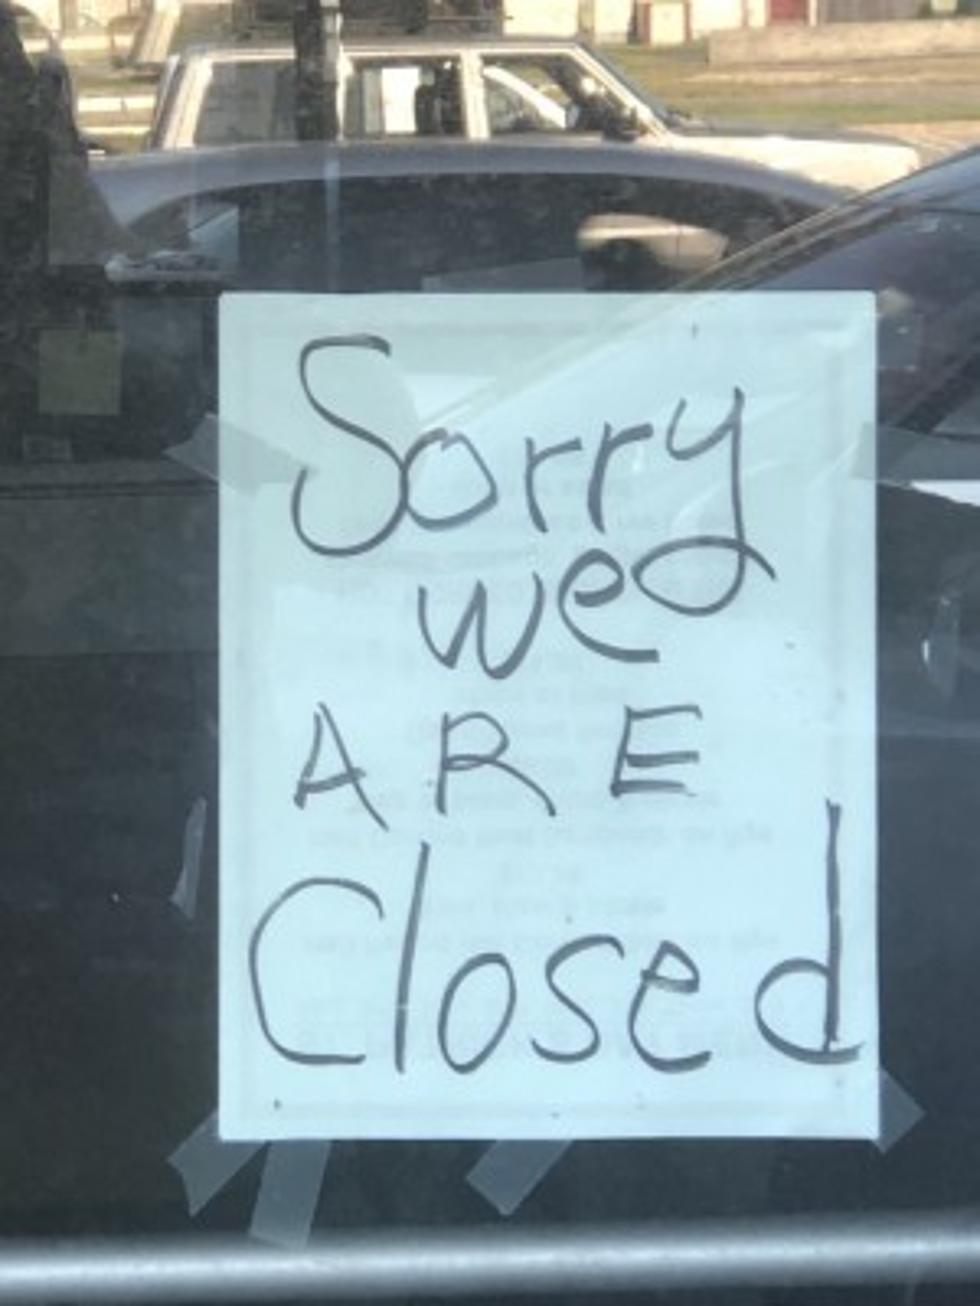 Over 10 Businesses and Restaurants Have Closed in the Last 18 Months in Ocean County